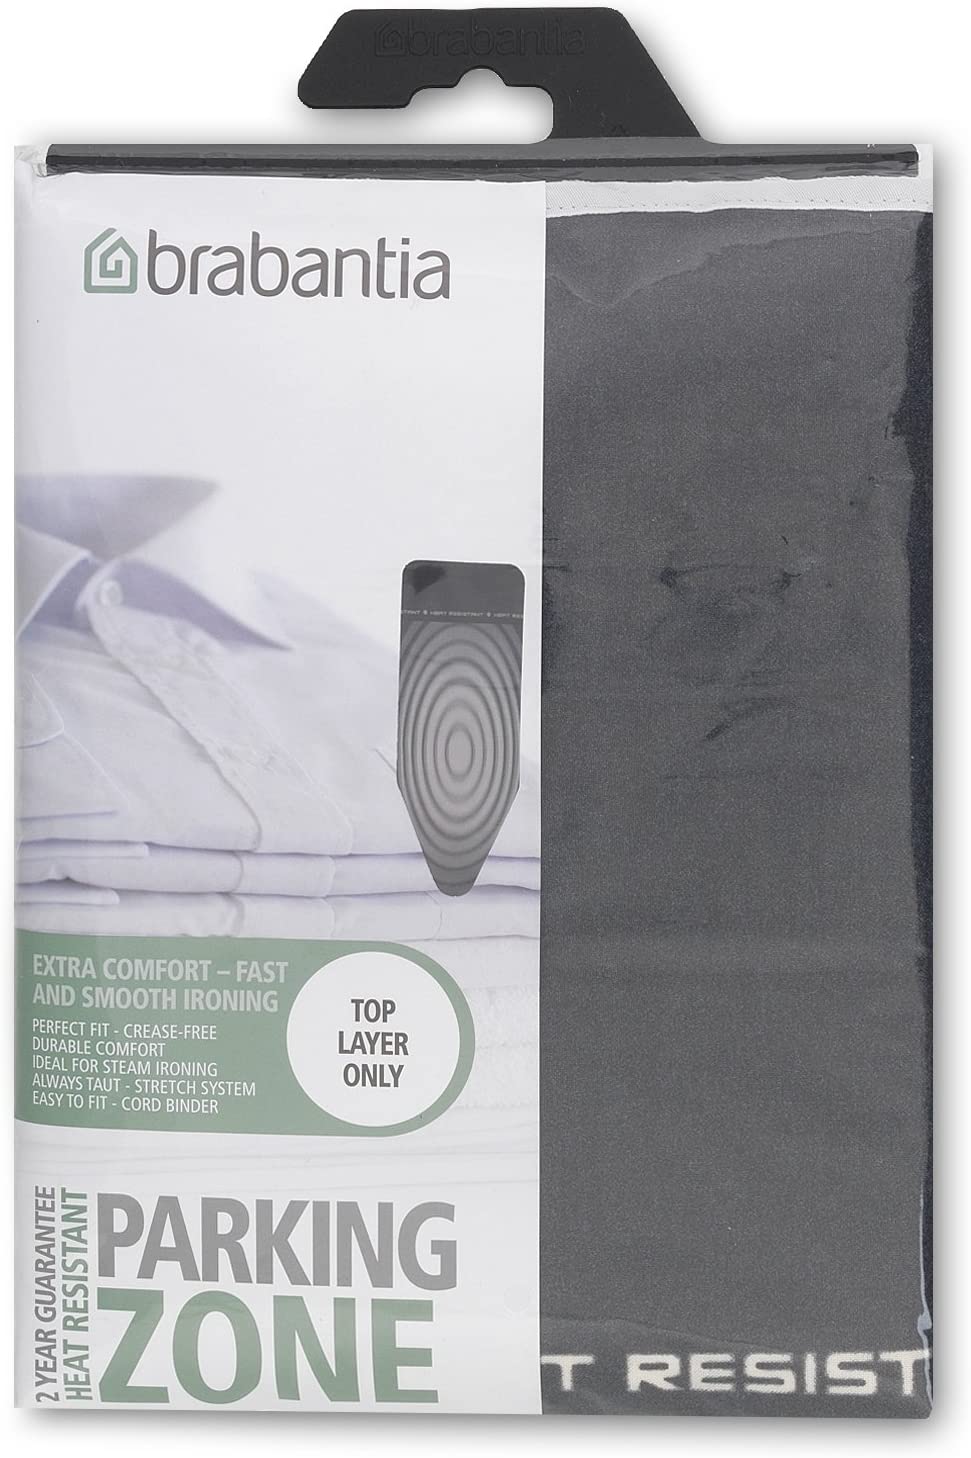 Size D Titan Ov Extra Large Brabantia Brabantia Ironing Board Cover with Parking Zone 